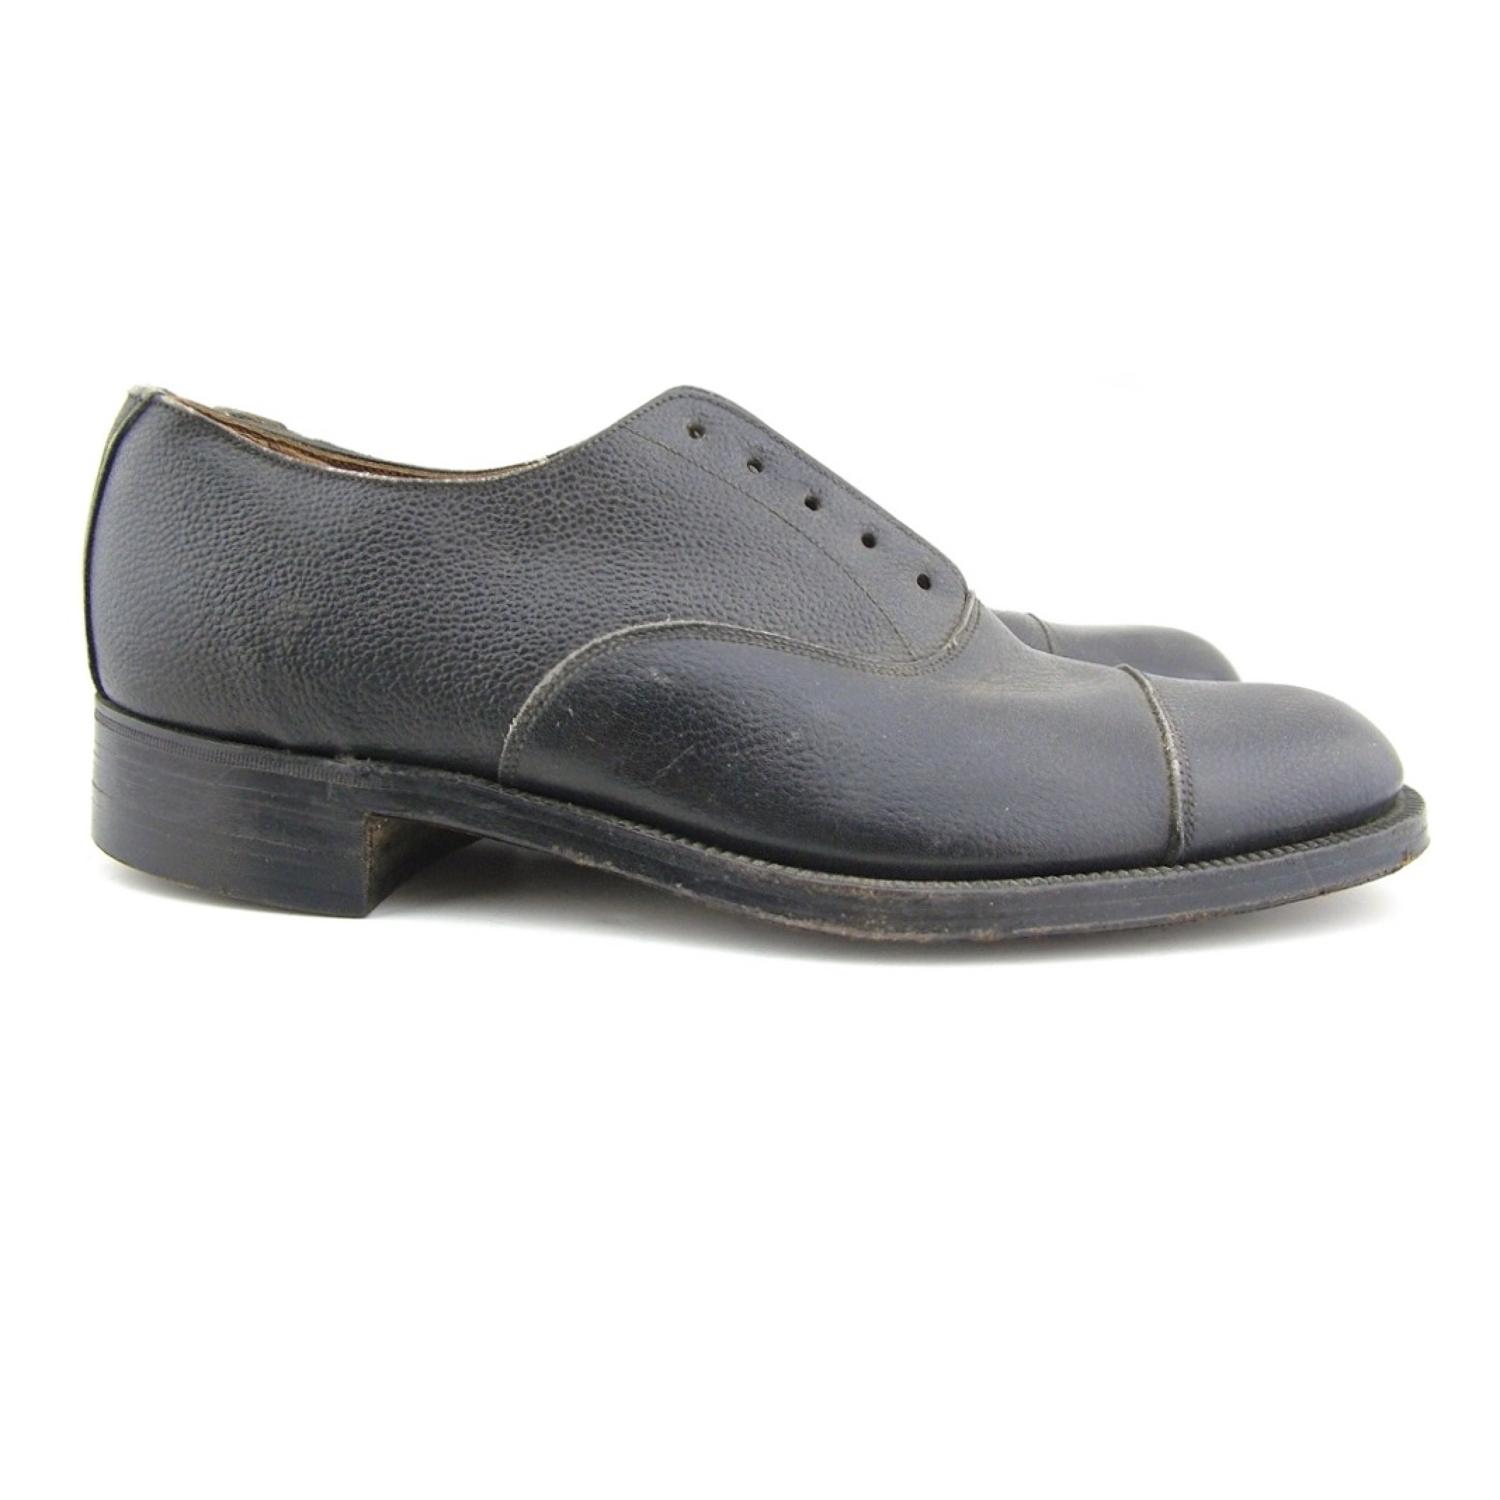 RAF issue service dress shoes